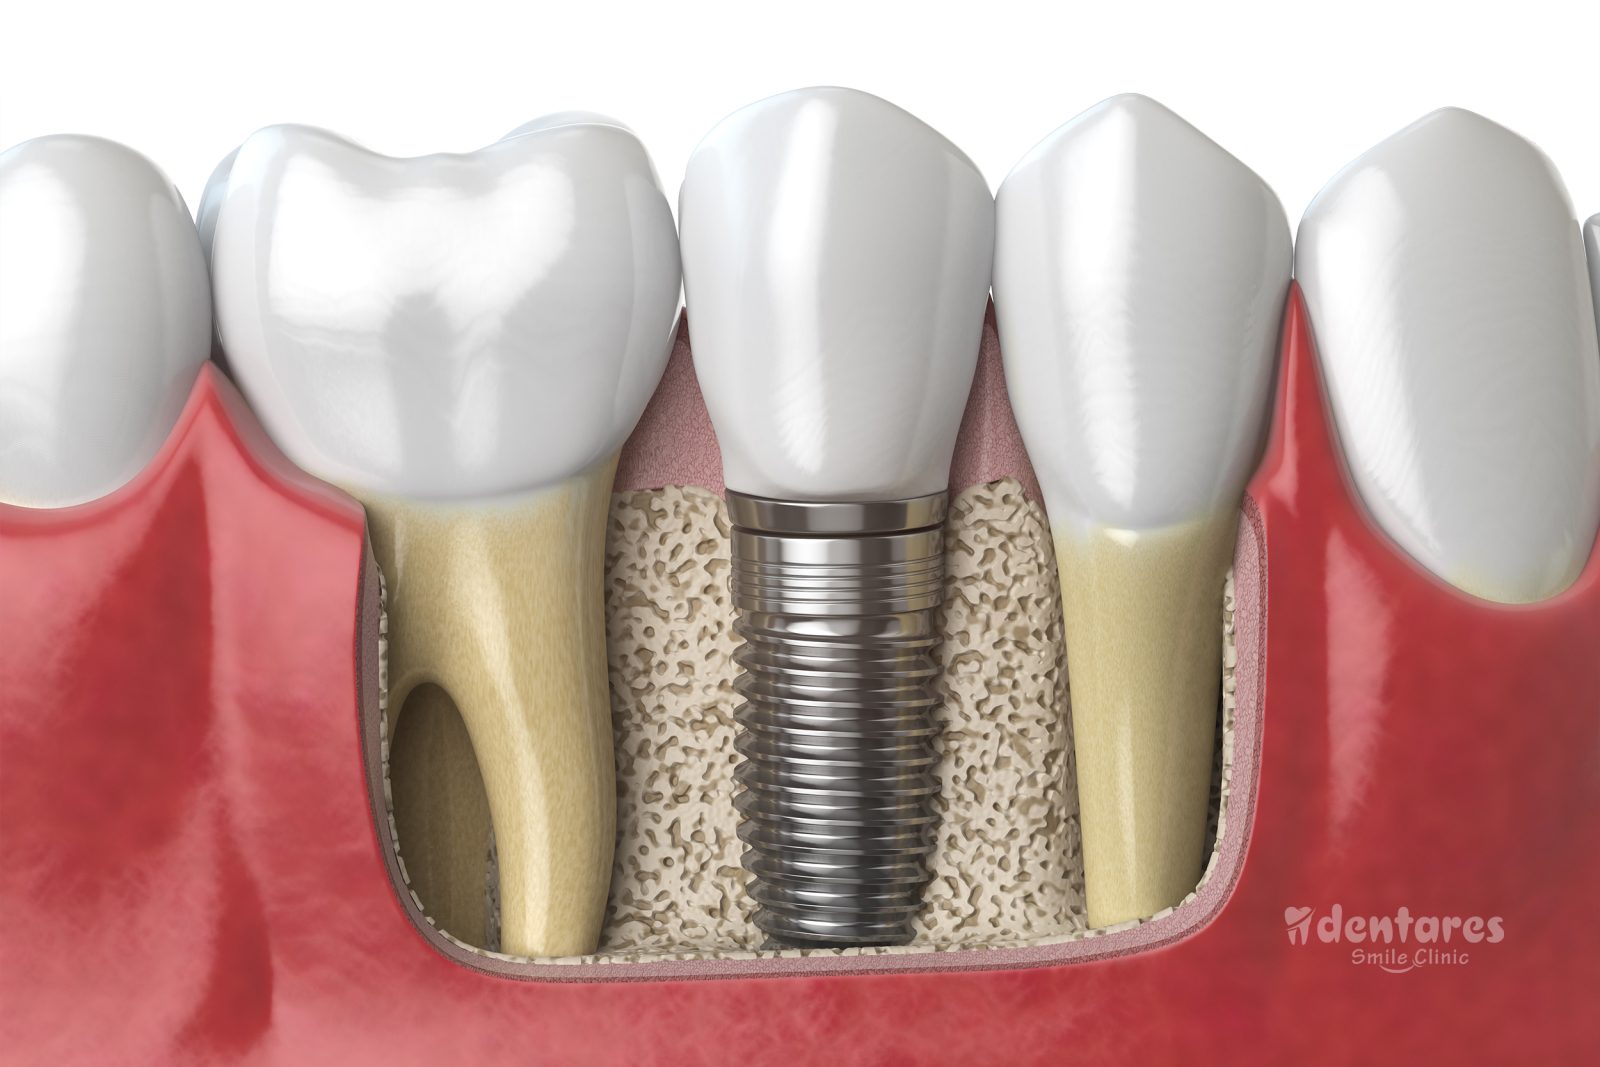 Dental implants in turkey, are biocompatible screws that are the best solution for restoring an edentulous area without using the support of your natural teeth. Implants have the same anatomical effect as the lower surface of natural teeth.